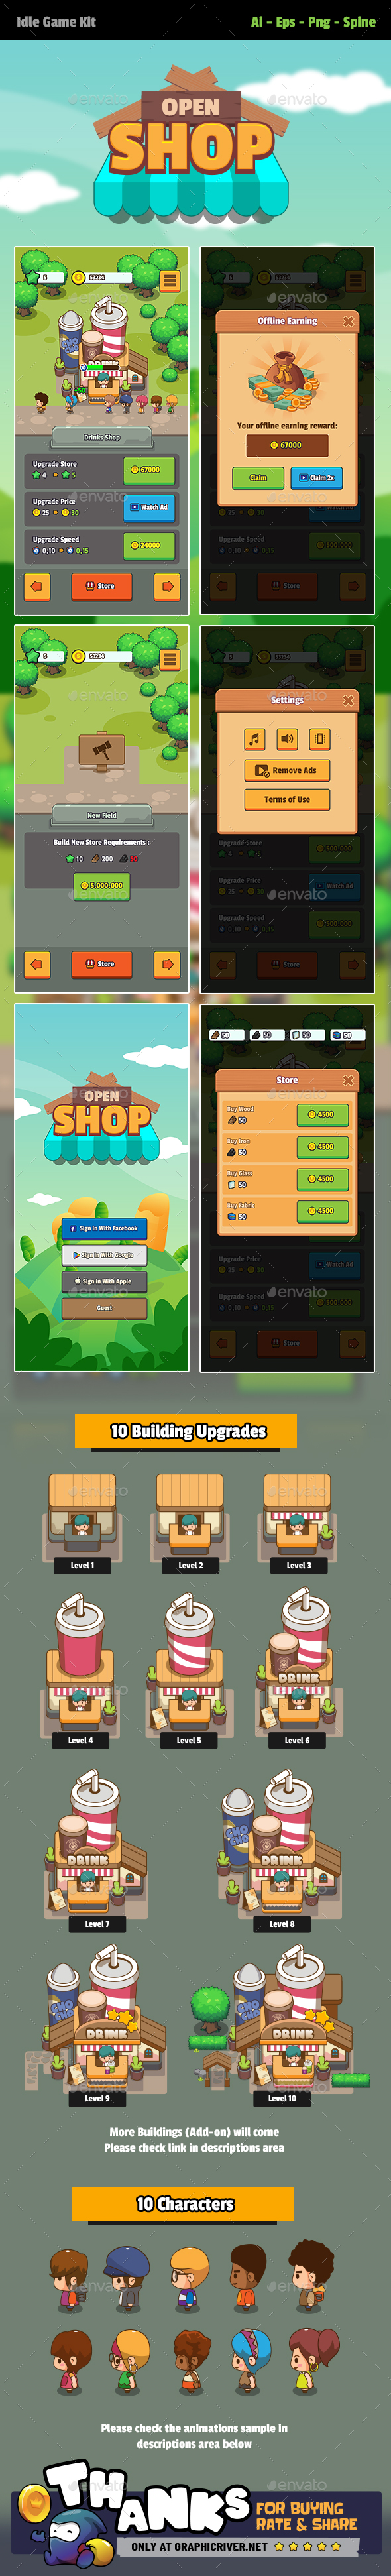 Open Shop - Idle Game